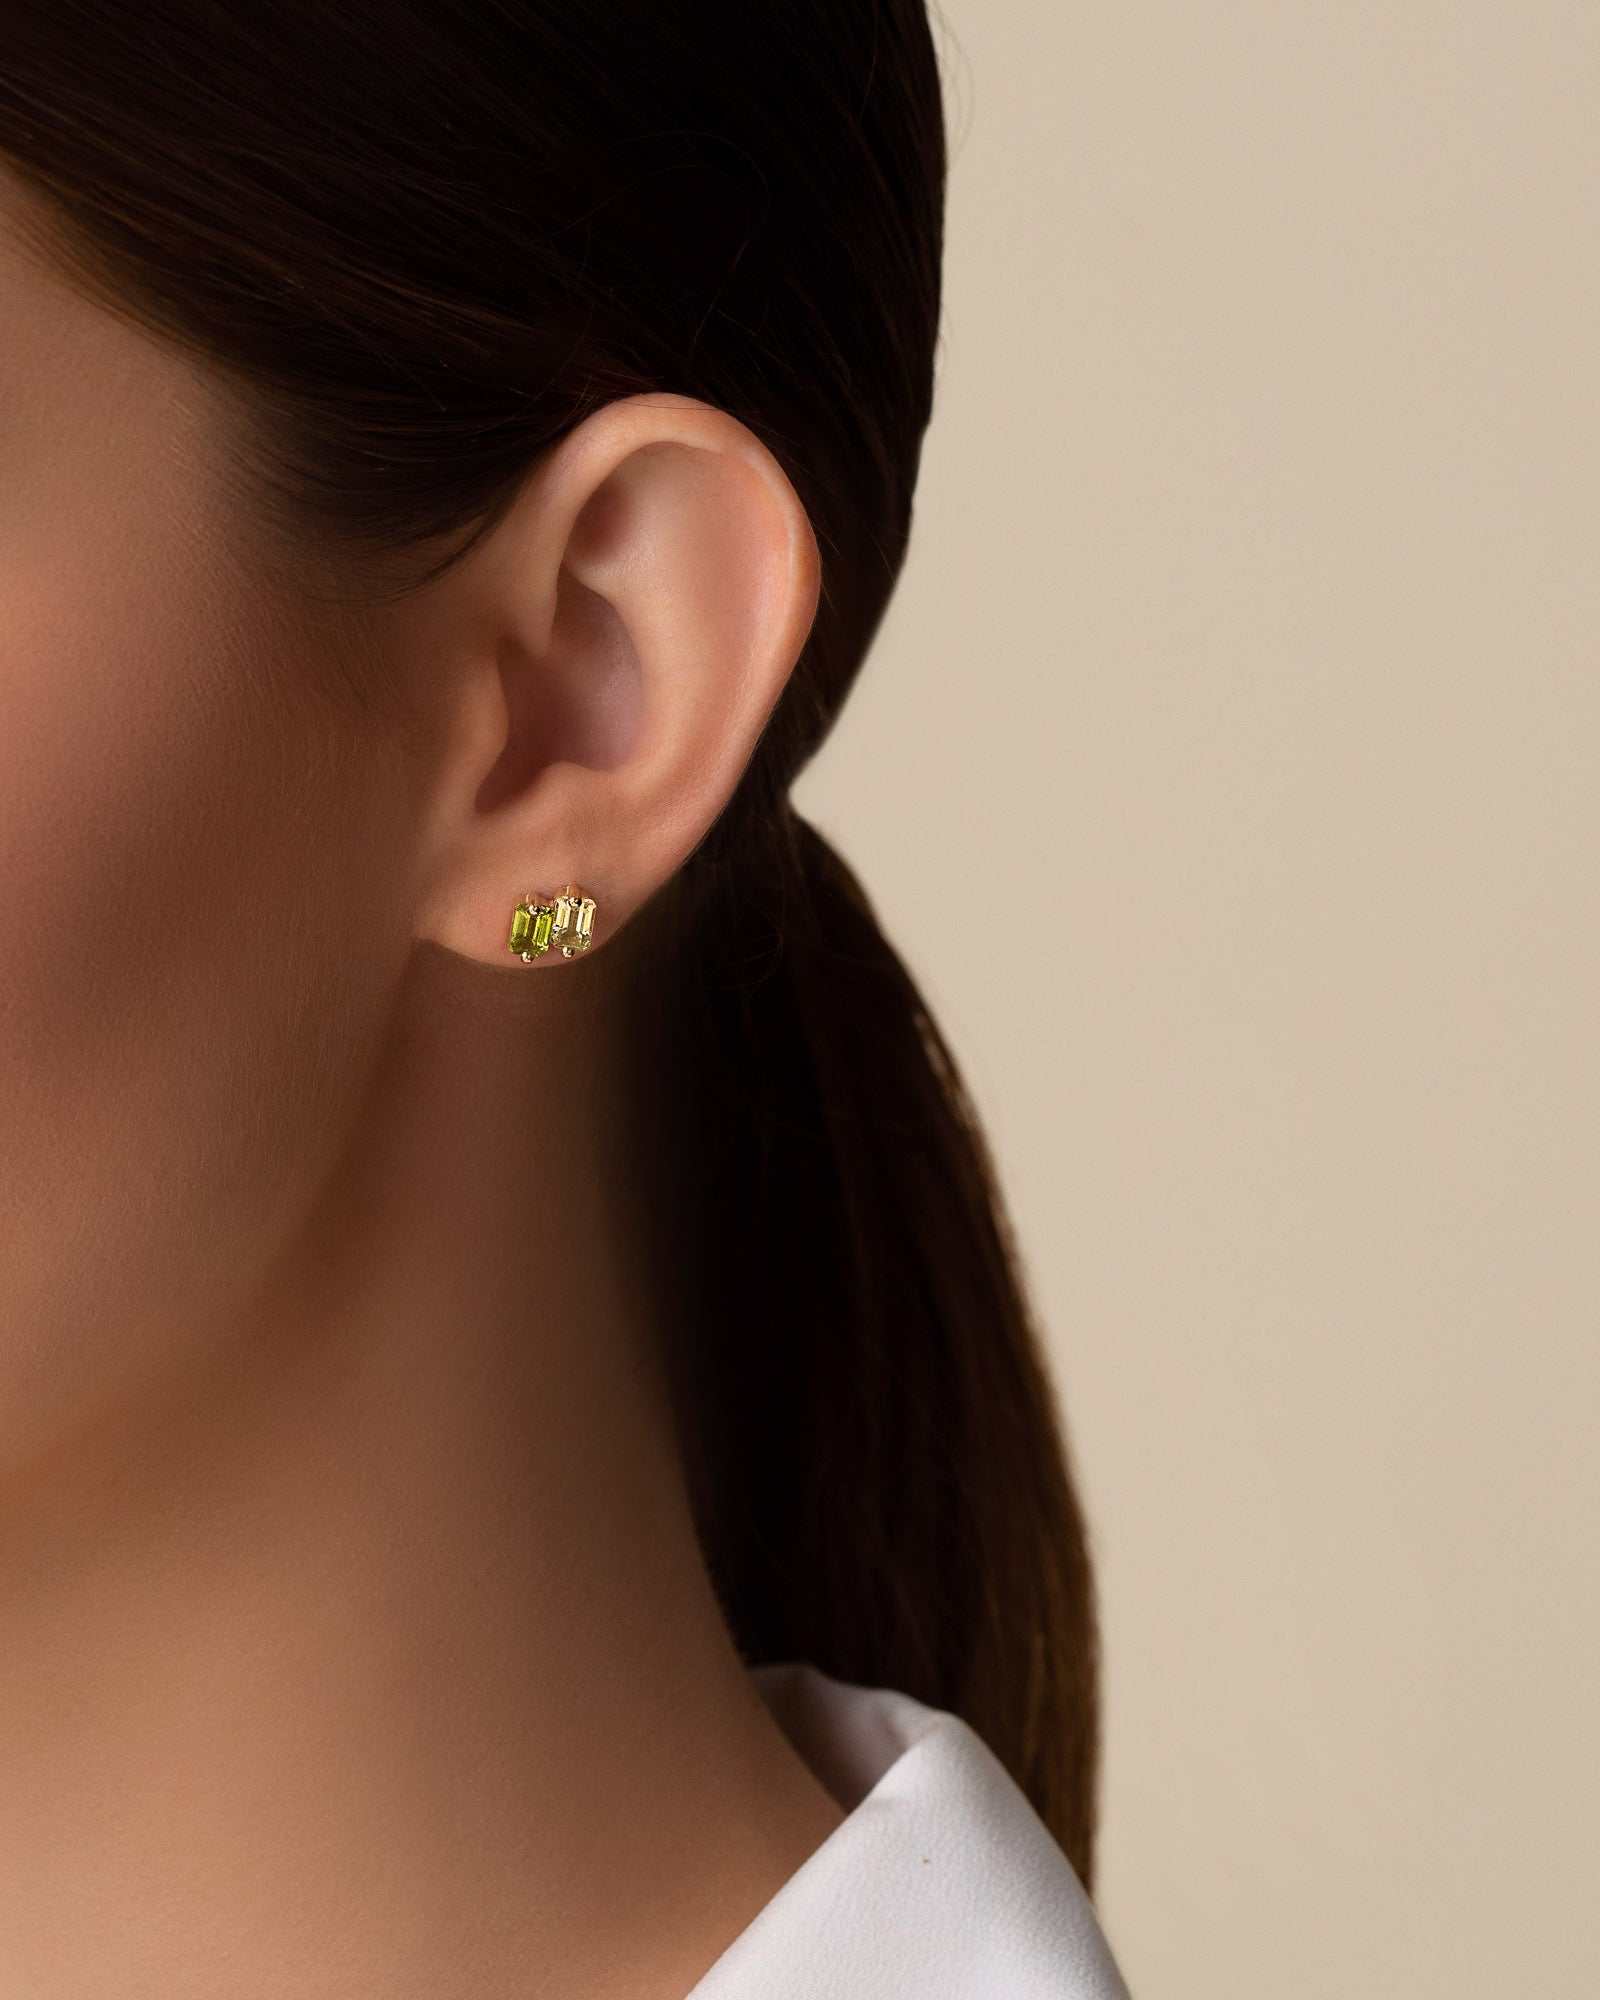 Kalan By Suzanne Kalan Ann Light Green Ombre Studs in 14K yellow gold